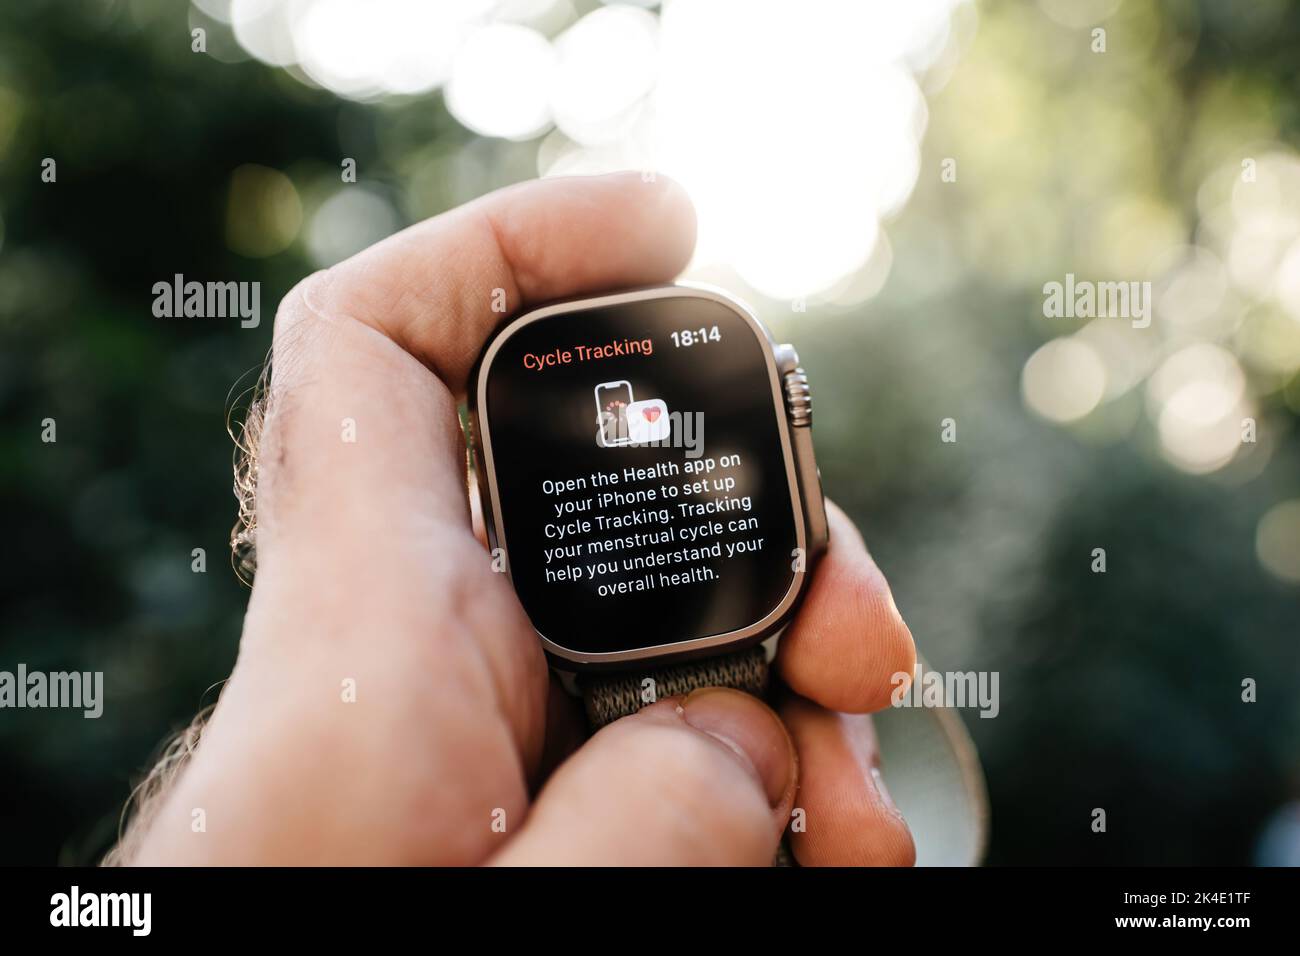 London, United Kingdom - Sept 28, 2022: Hand holding new Apple Computers Apple Watch Ultra wearable in hands looking at the Cycle Tracking app for menstrual cycle to understand overall health Stock Photo